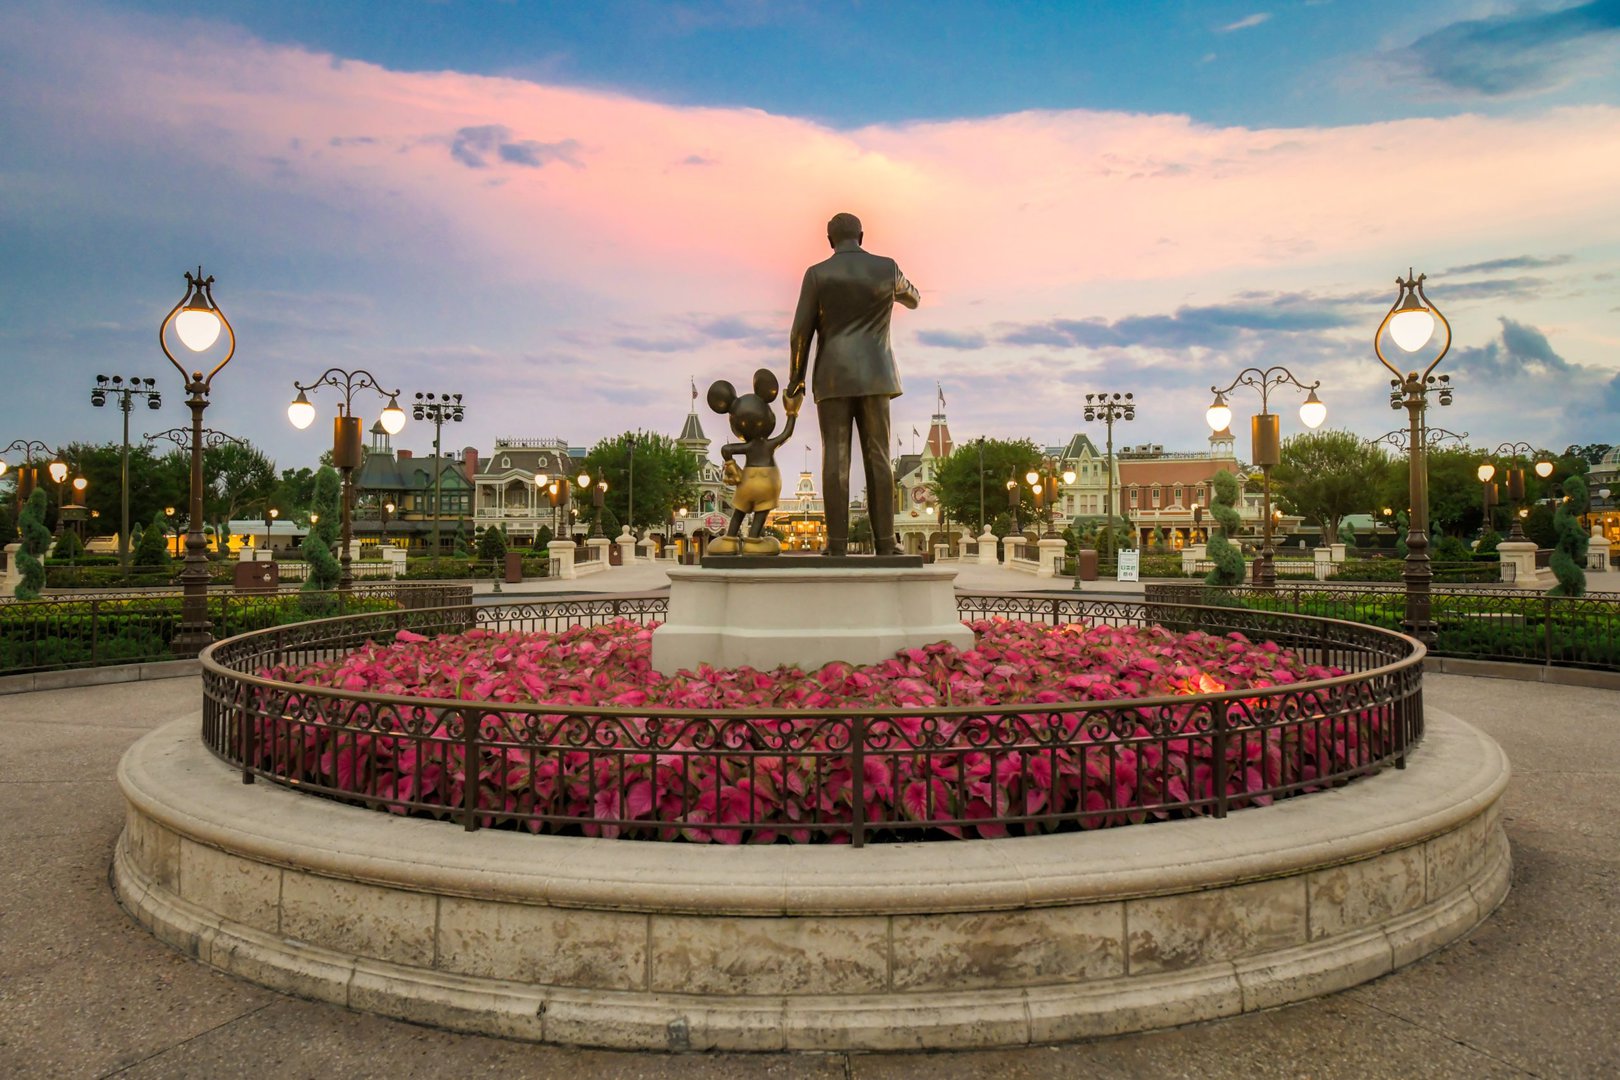 Disney Vacation Tips to make it seem like you're the only one at Disneyworld with no wait times on rides, like you see here in this picture of Walt Disney holding Mickey Mouse's hand at sunset.